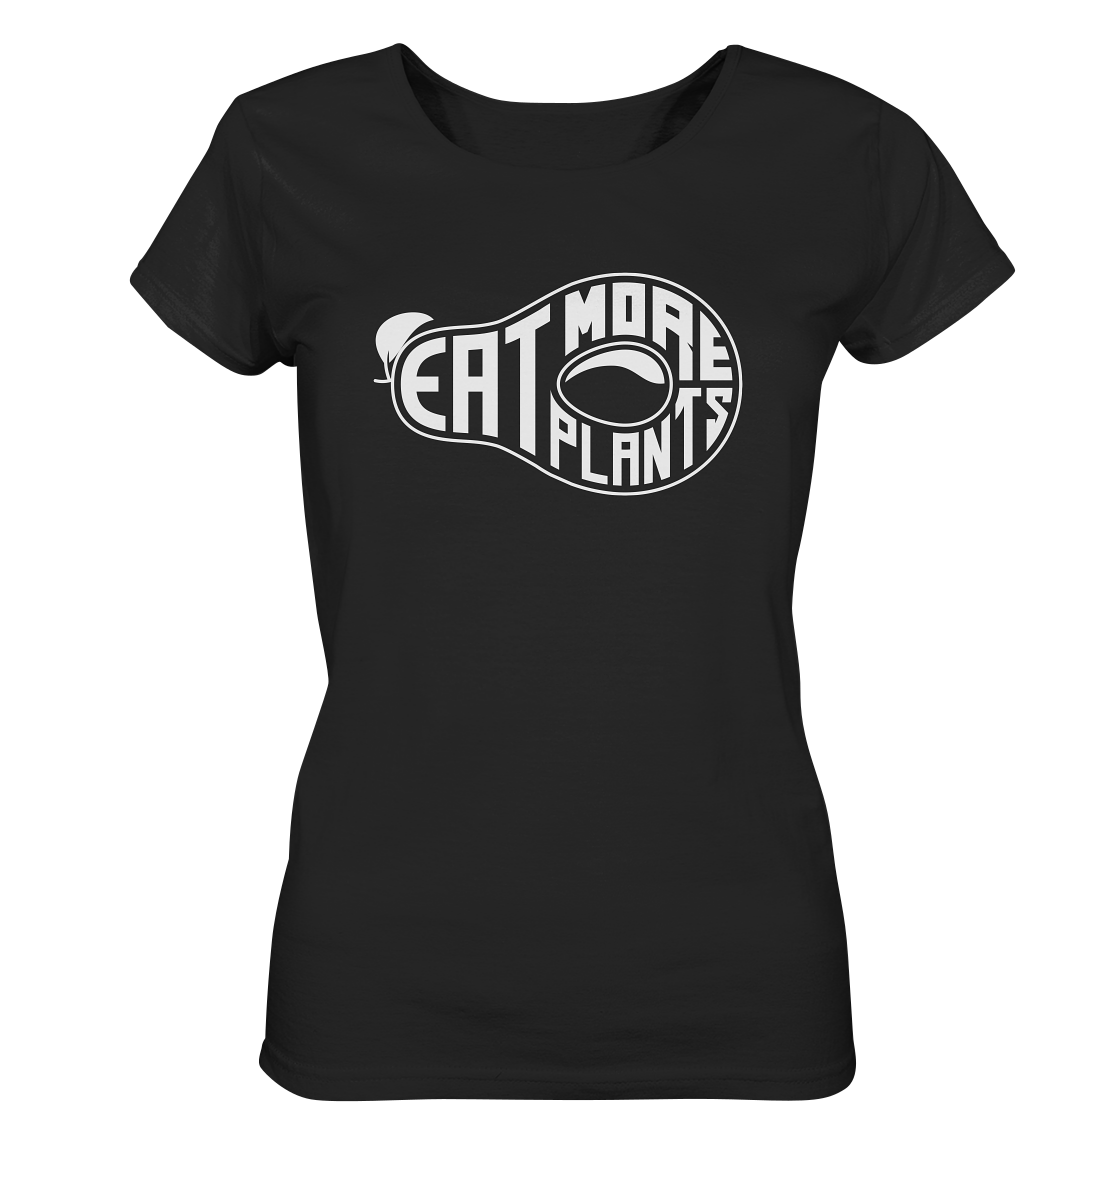 Organic ladies fitted scoop neck t-shirt in black saying Eat More Plants